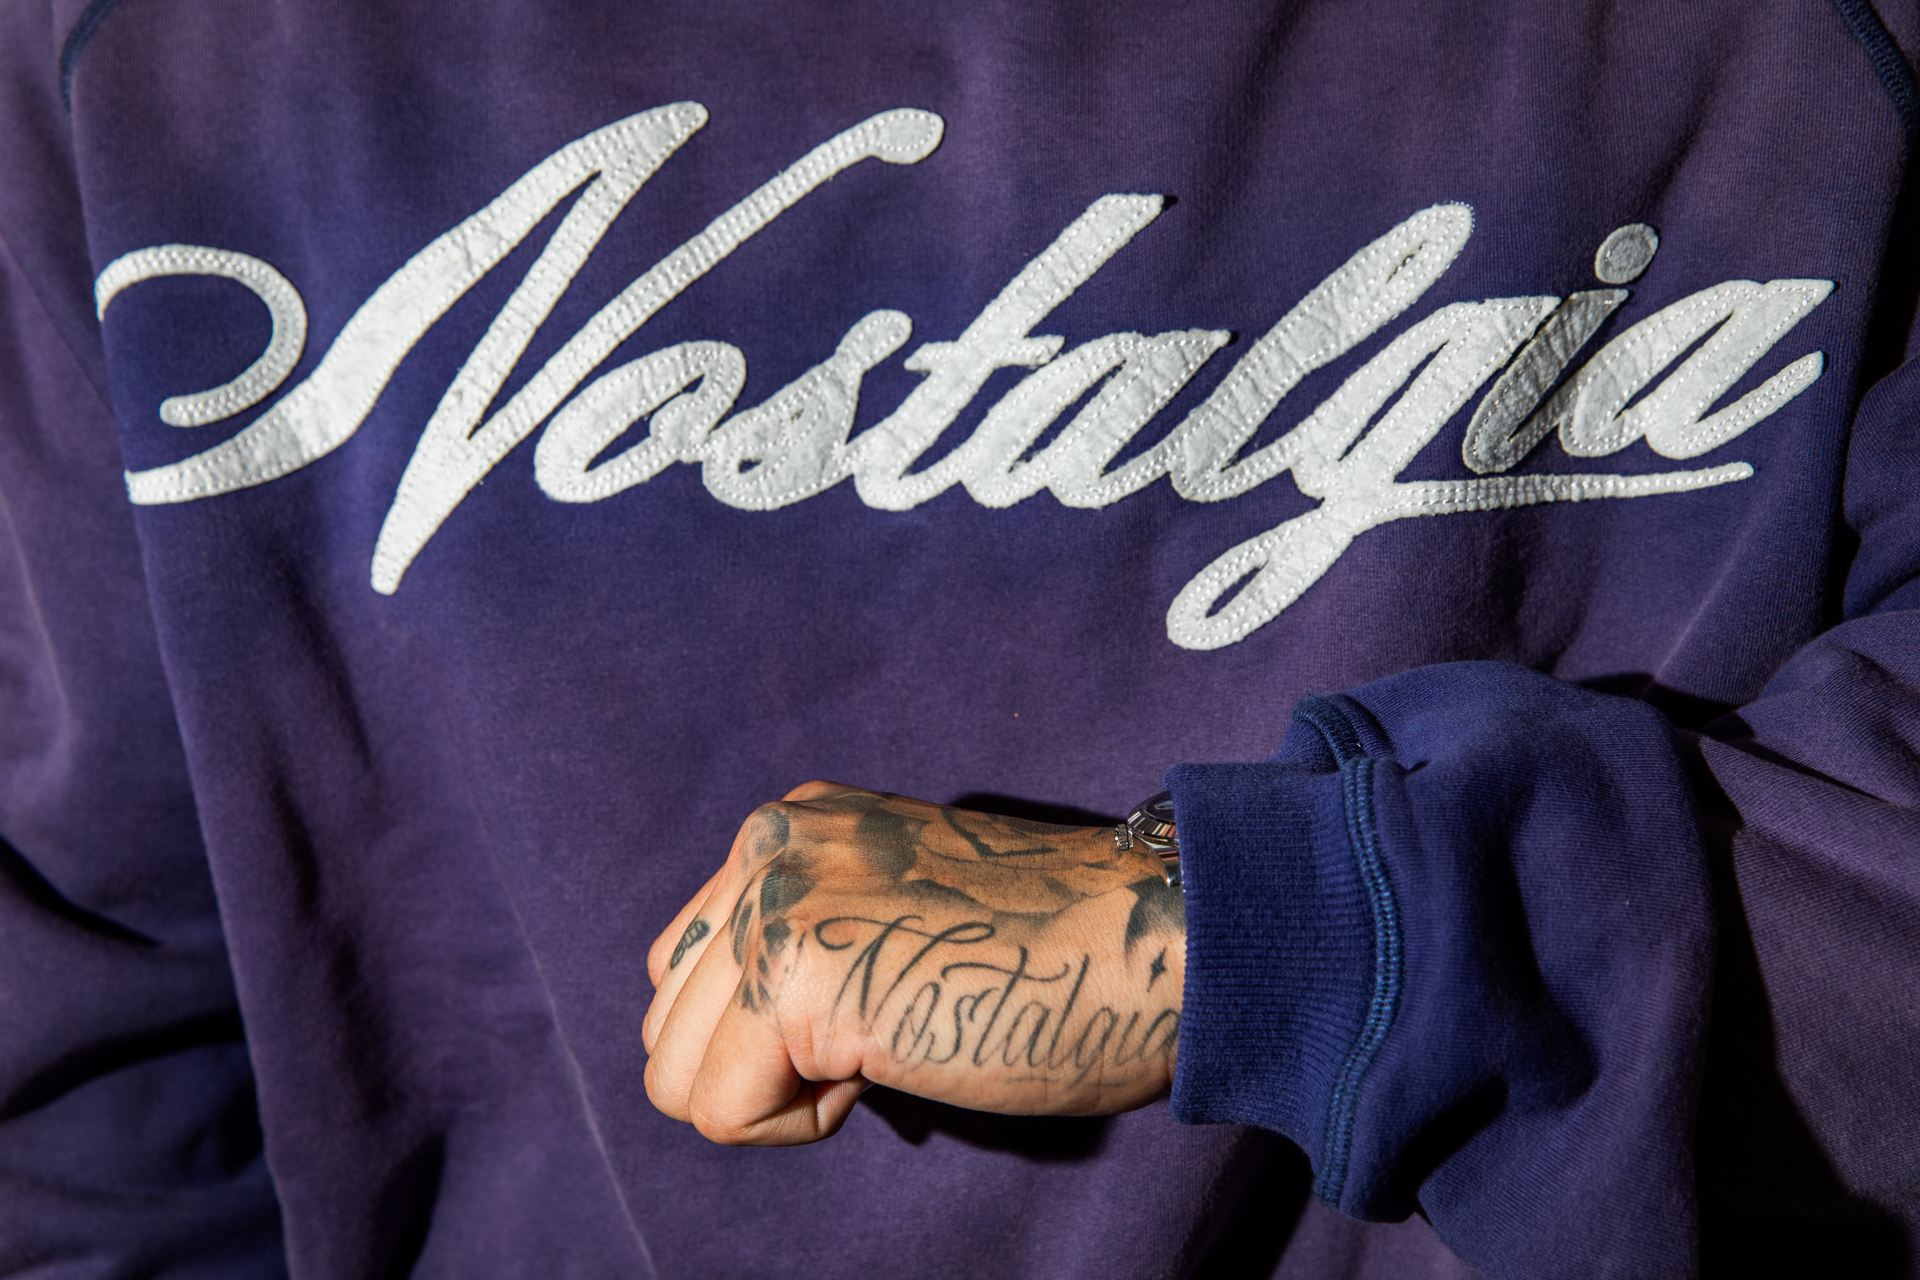 A purple sweatshirt with white lettering fills the photo frame. A hand is held in front.